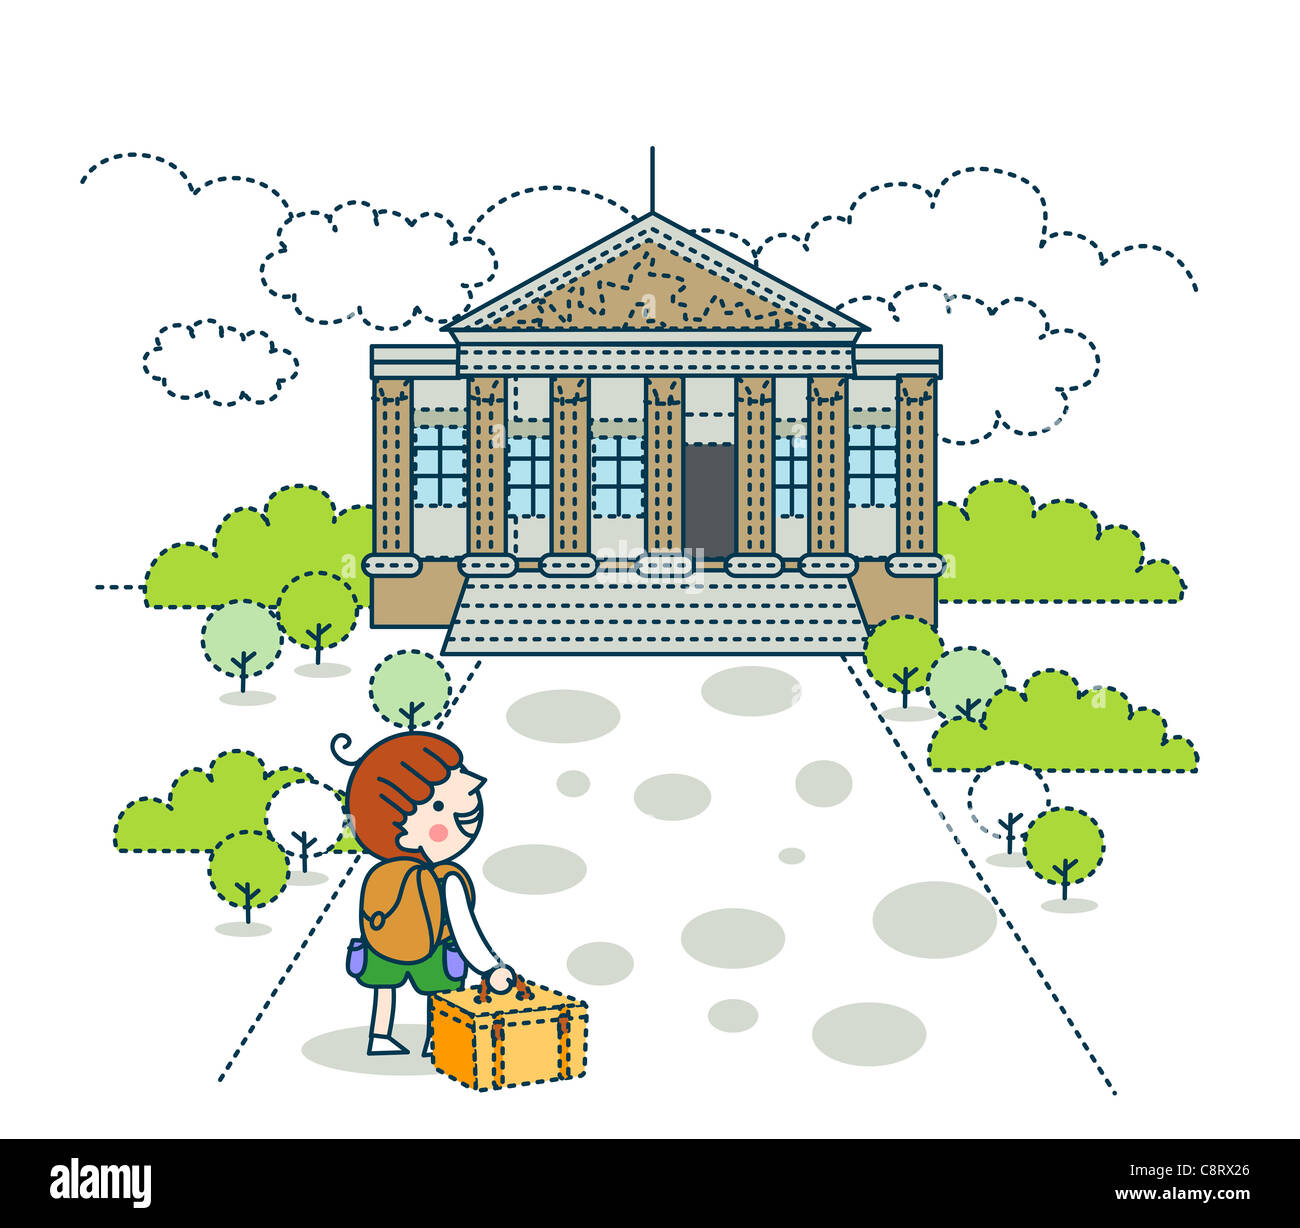 Illustration of tourist in front of The National Theater Munich Stock Photo